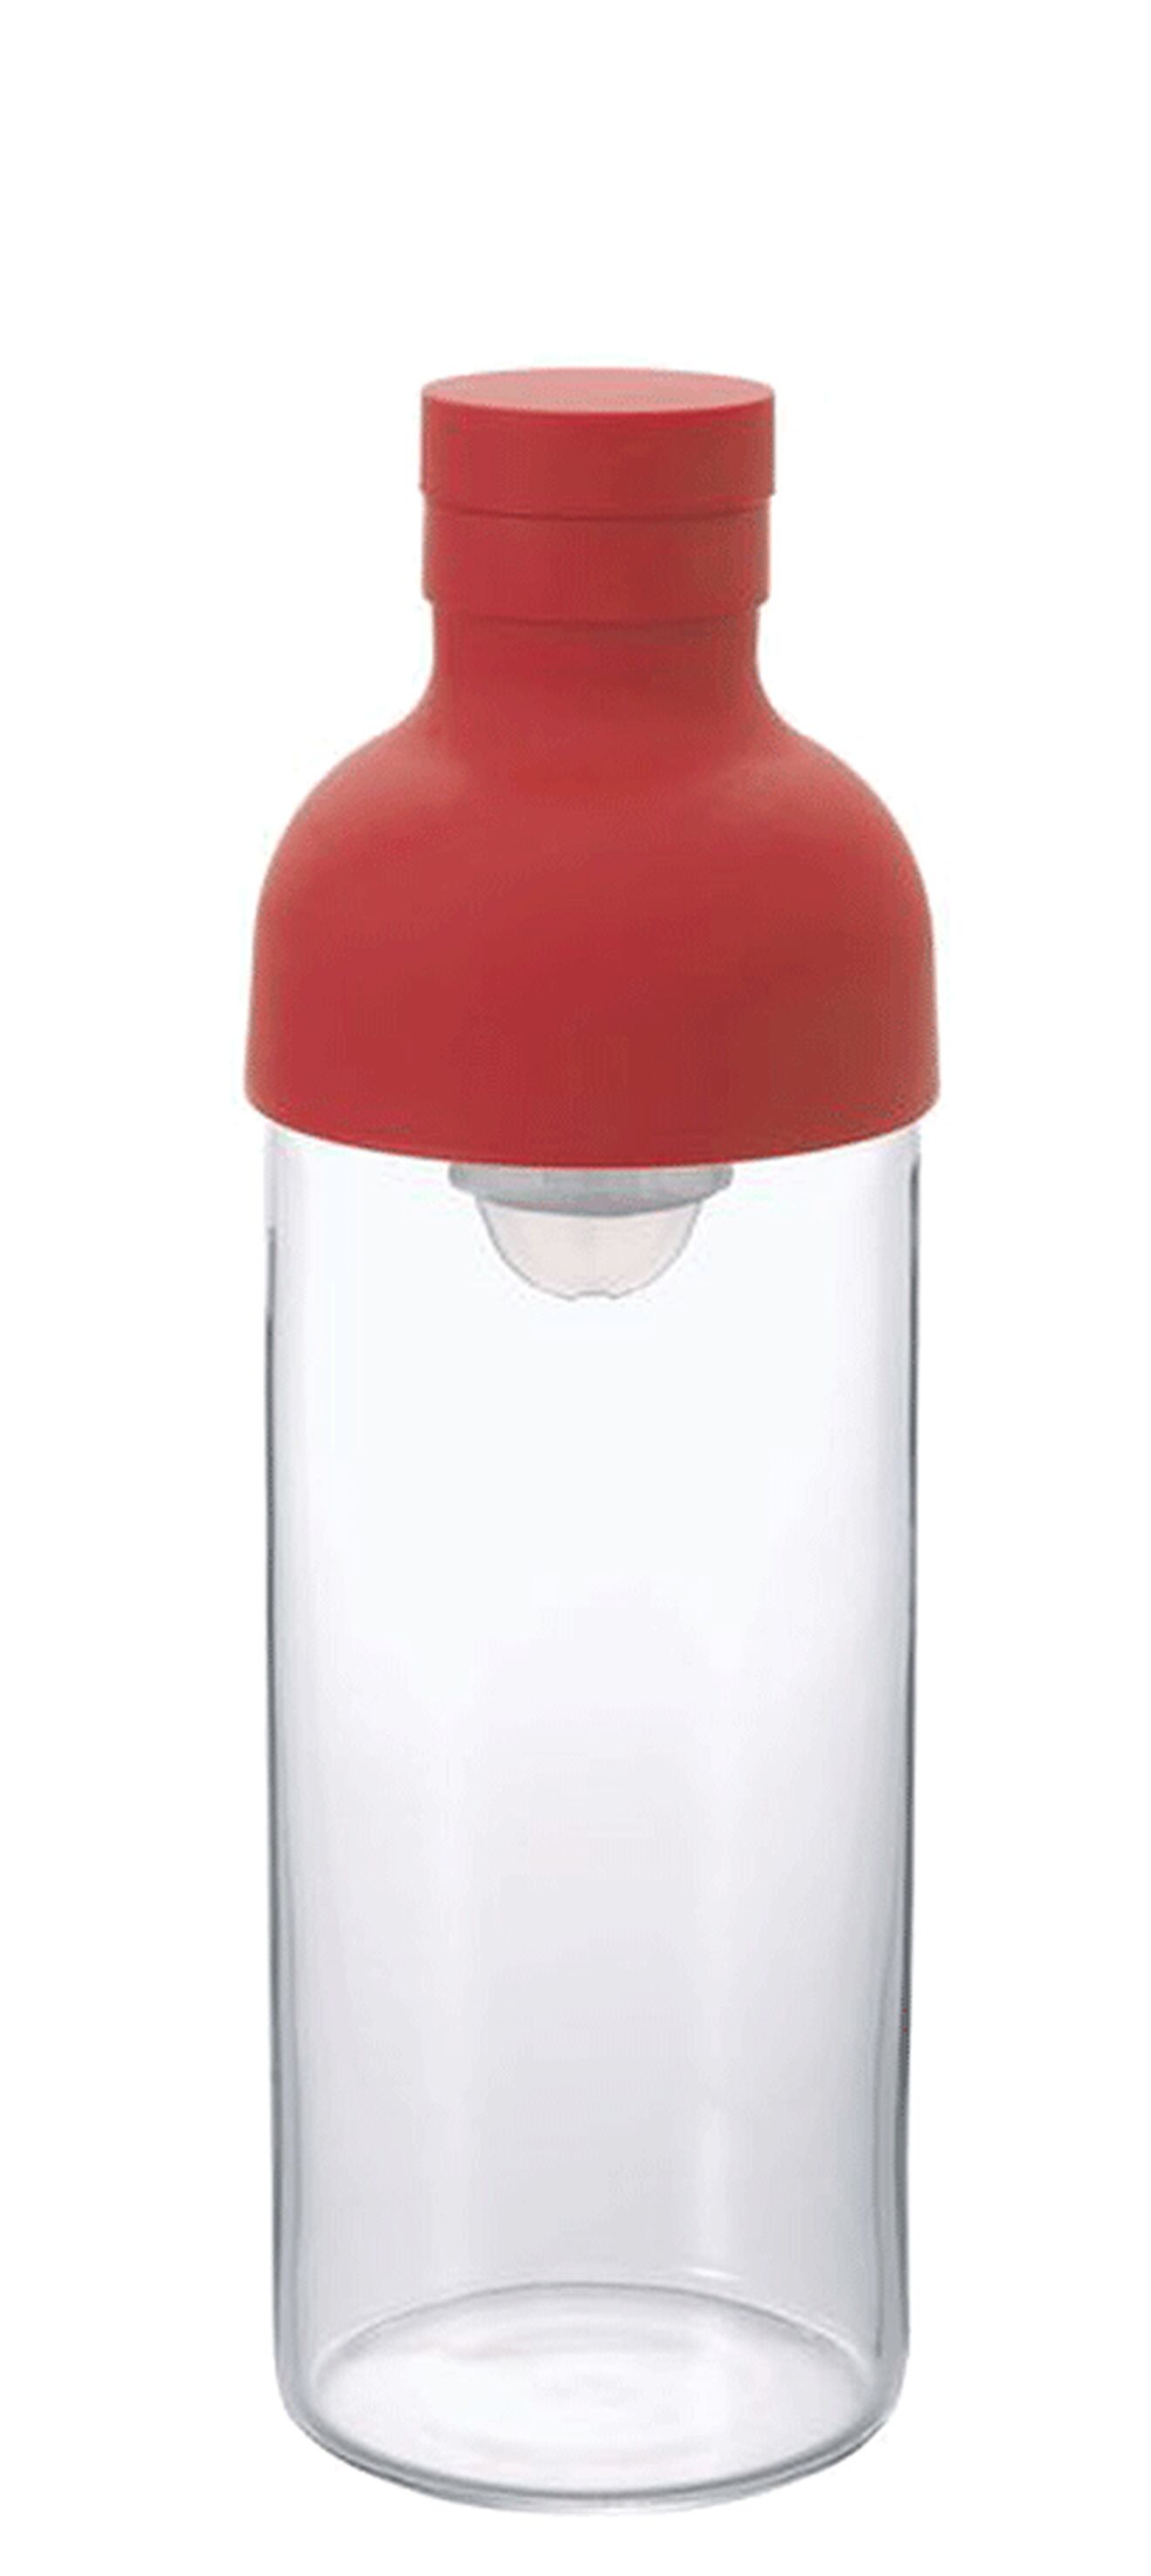 HARIO IN FLES ROOD 300ML | Home